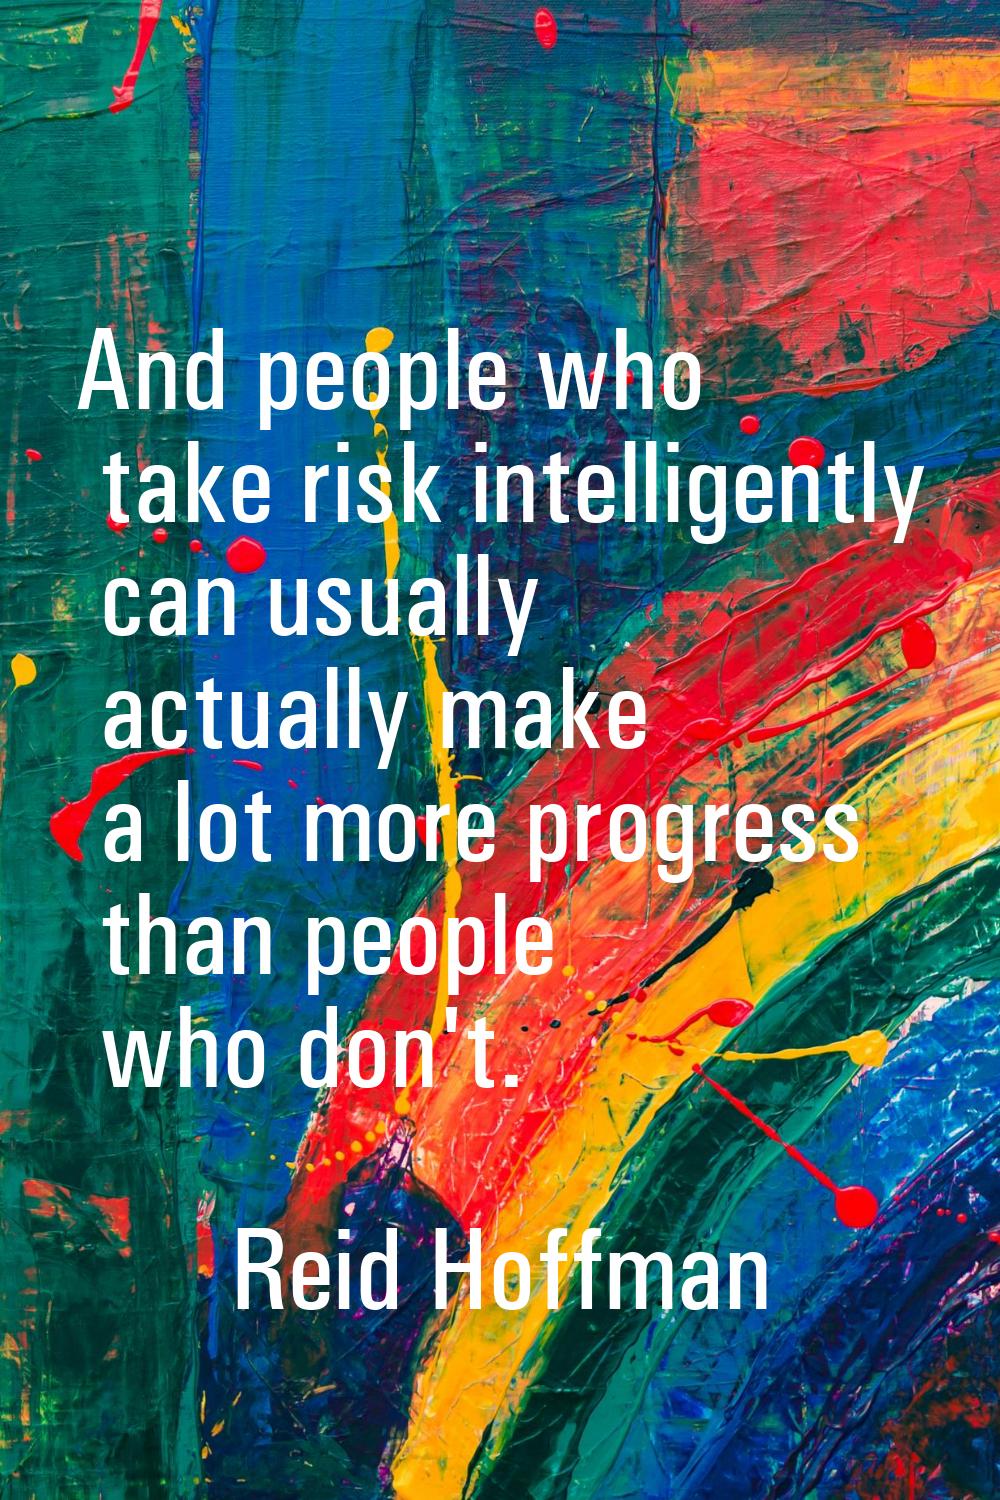 And people who take risk intelligently can usually actually make a lot more progress than people wh